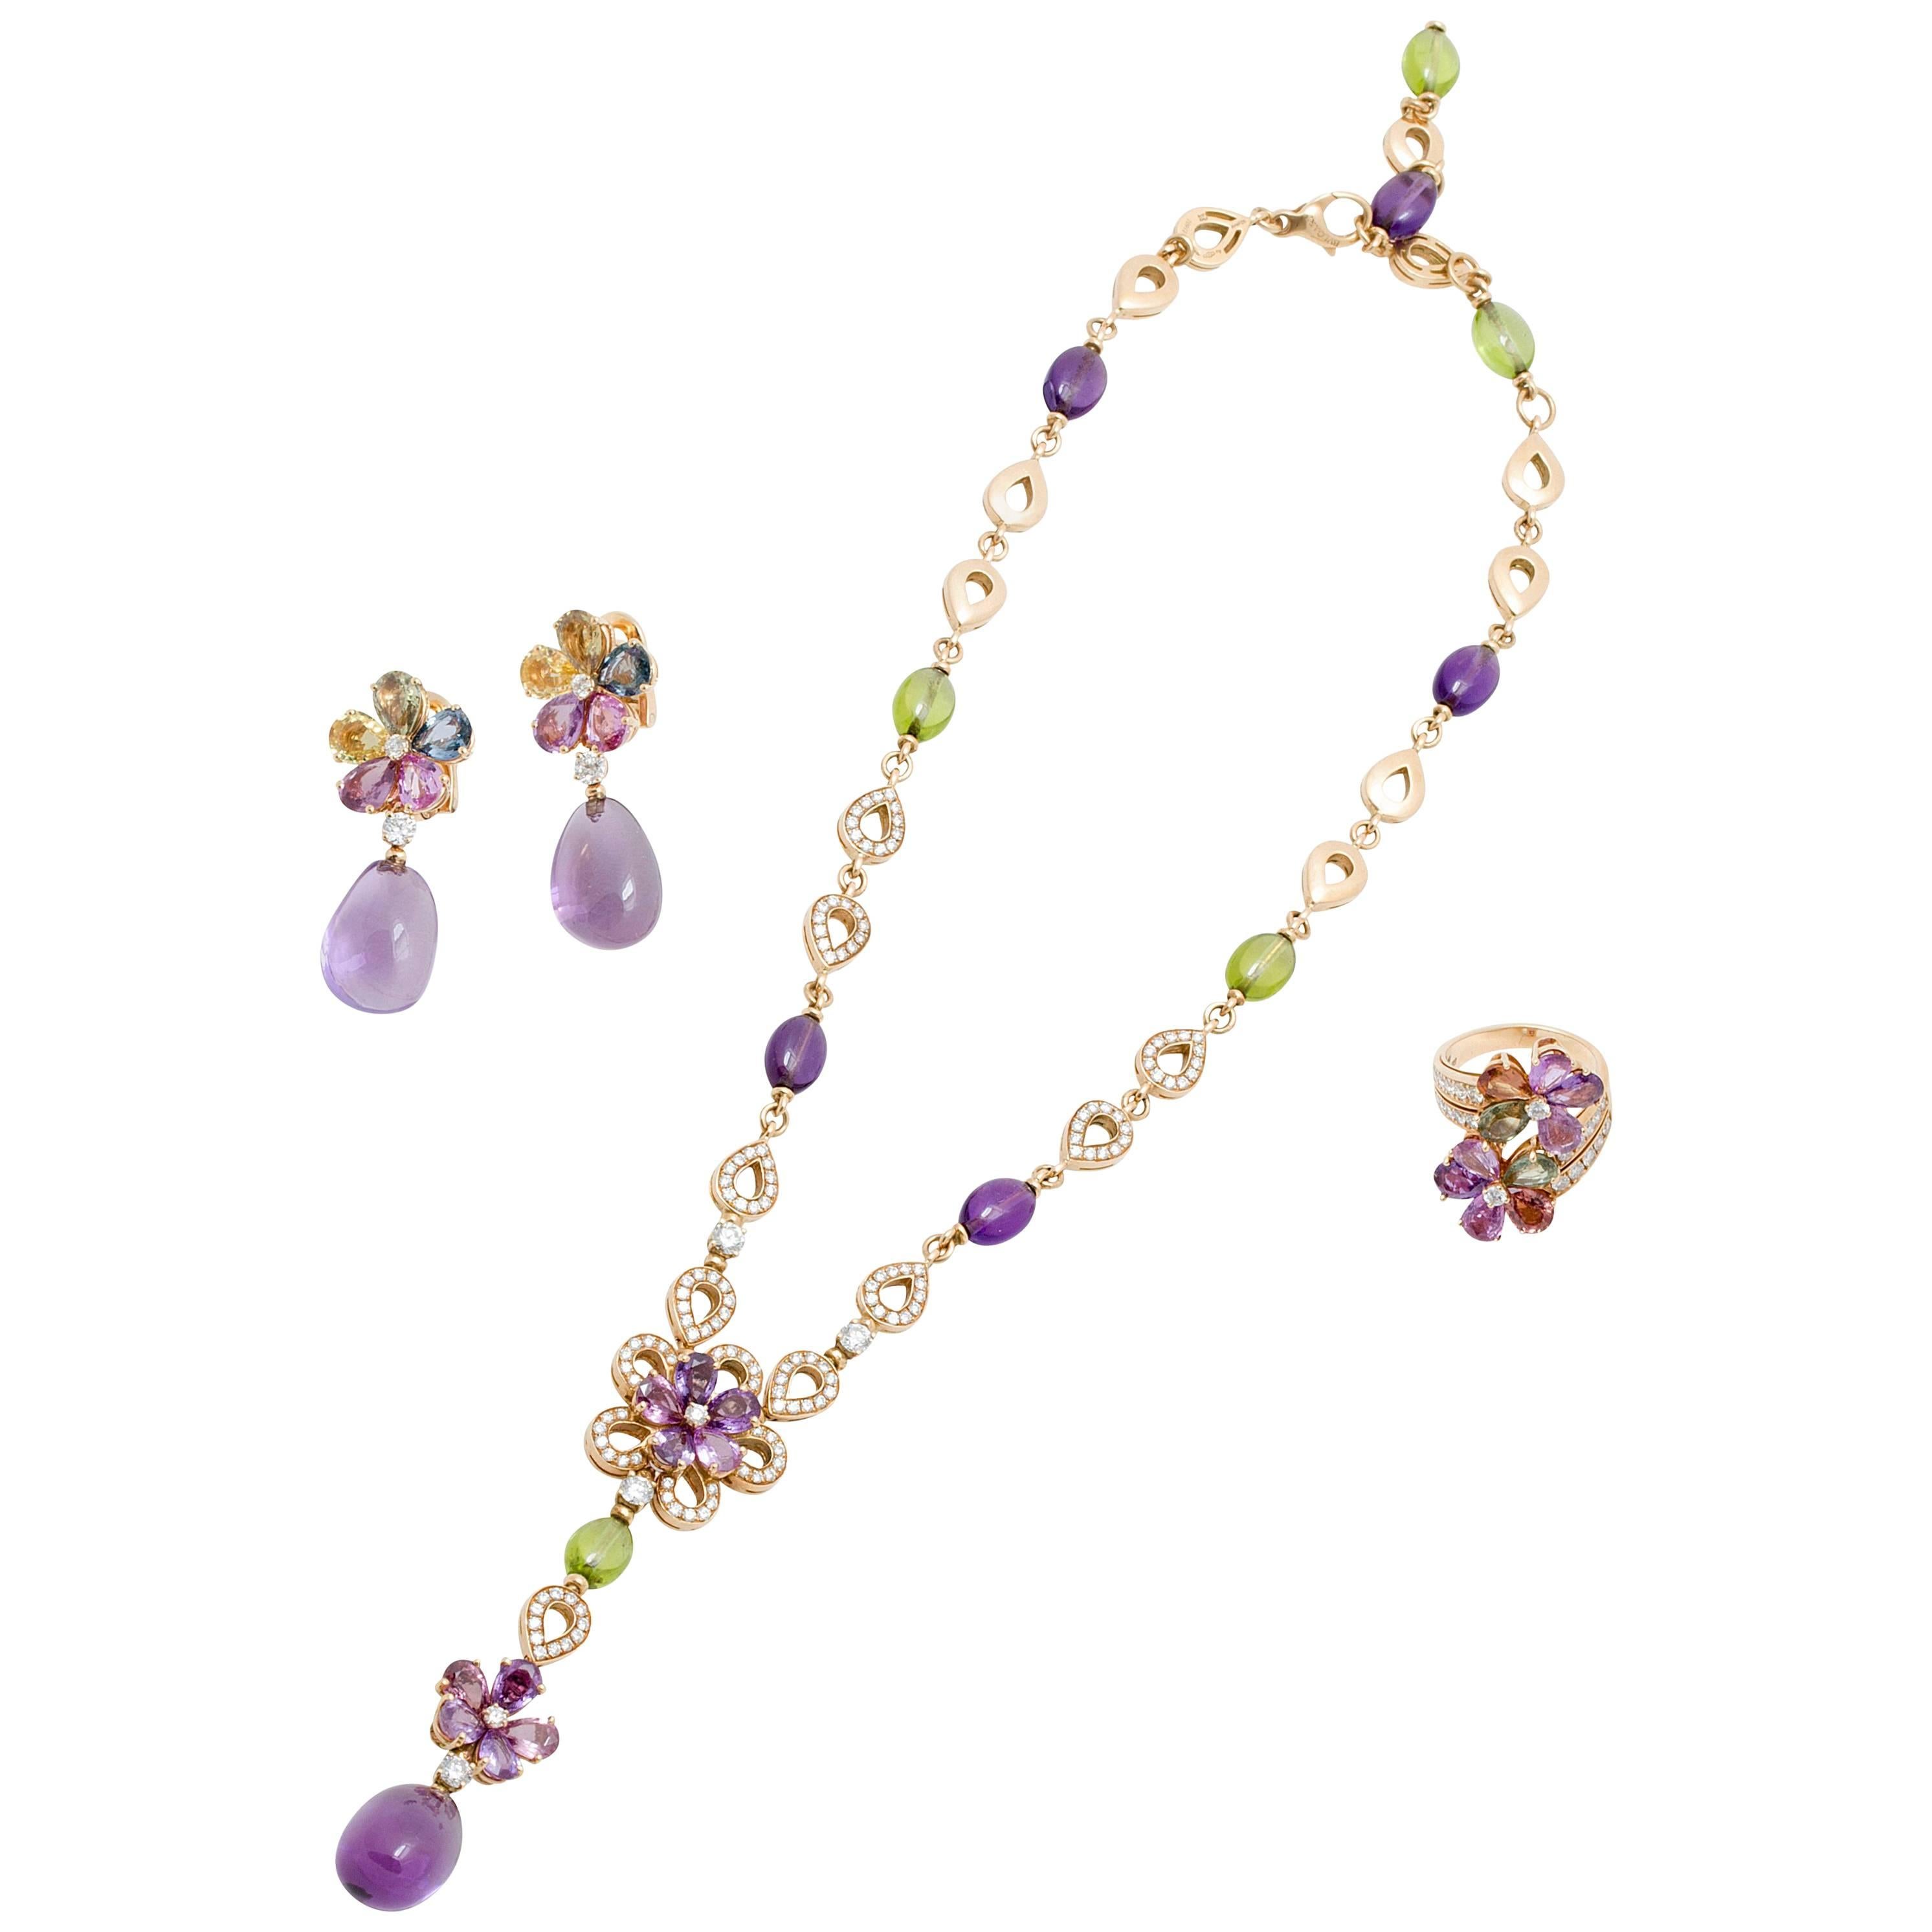 Bulgari Bvlgari  Diamond and Color Stone Necklace Earring and Ring Set For Sale